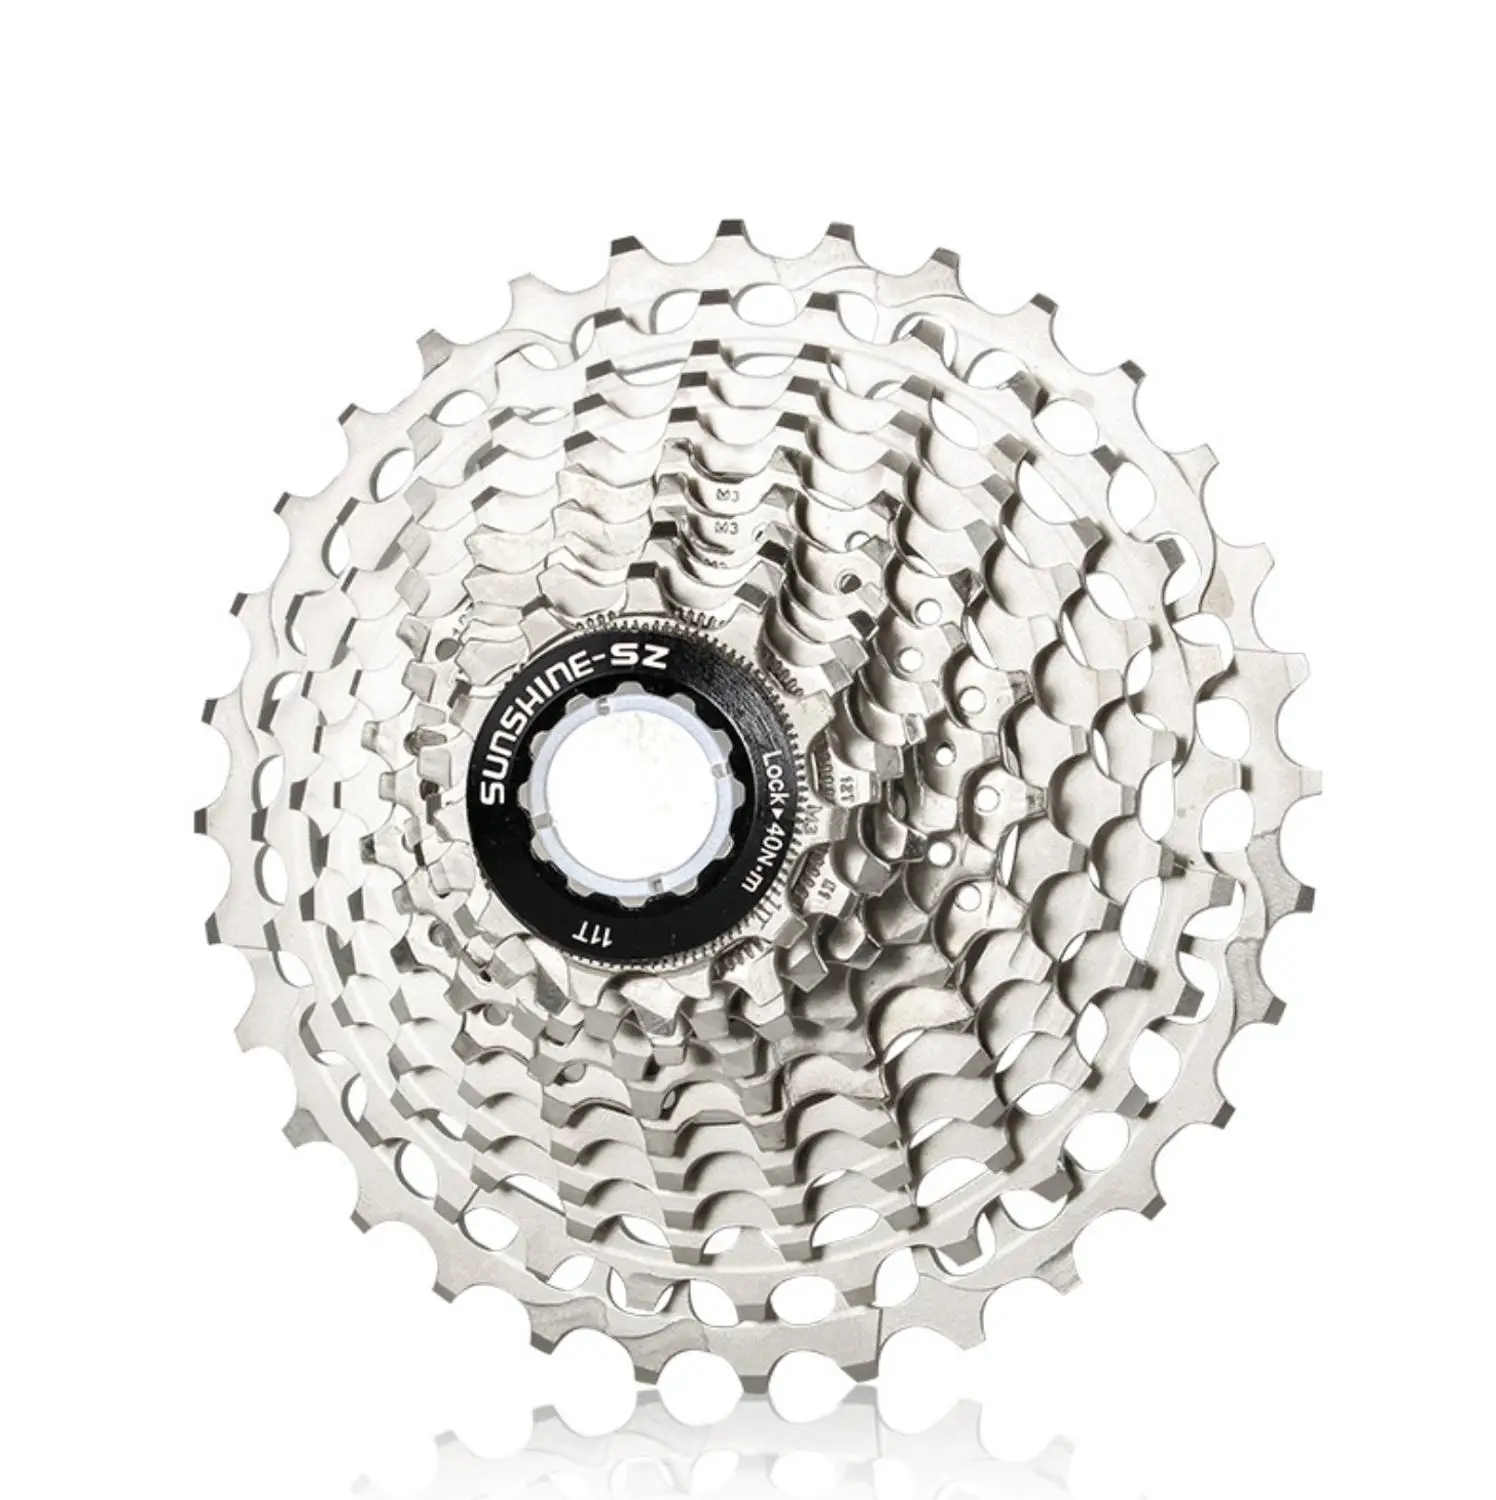 SUNSHINE Road Bicycle Freewheel 8S 9S 10S 11S 12 Speed 11-23T 25T 28T 32T 34T 36T Steel Variable Speed Cassette for Shimano SRAM